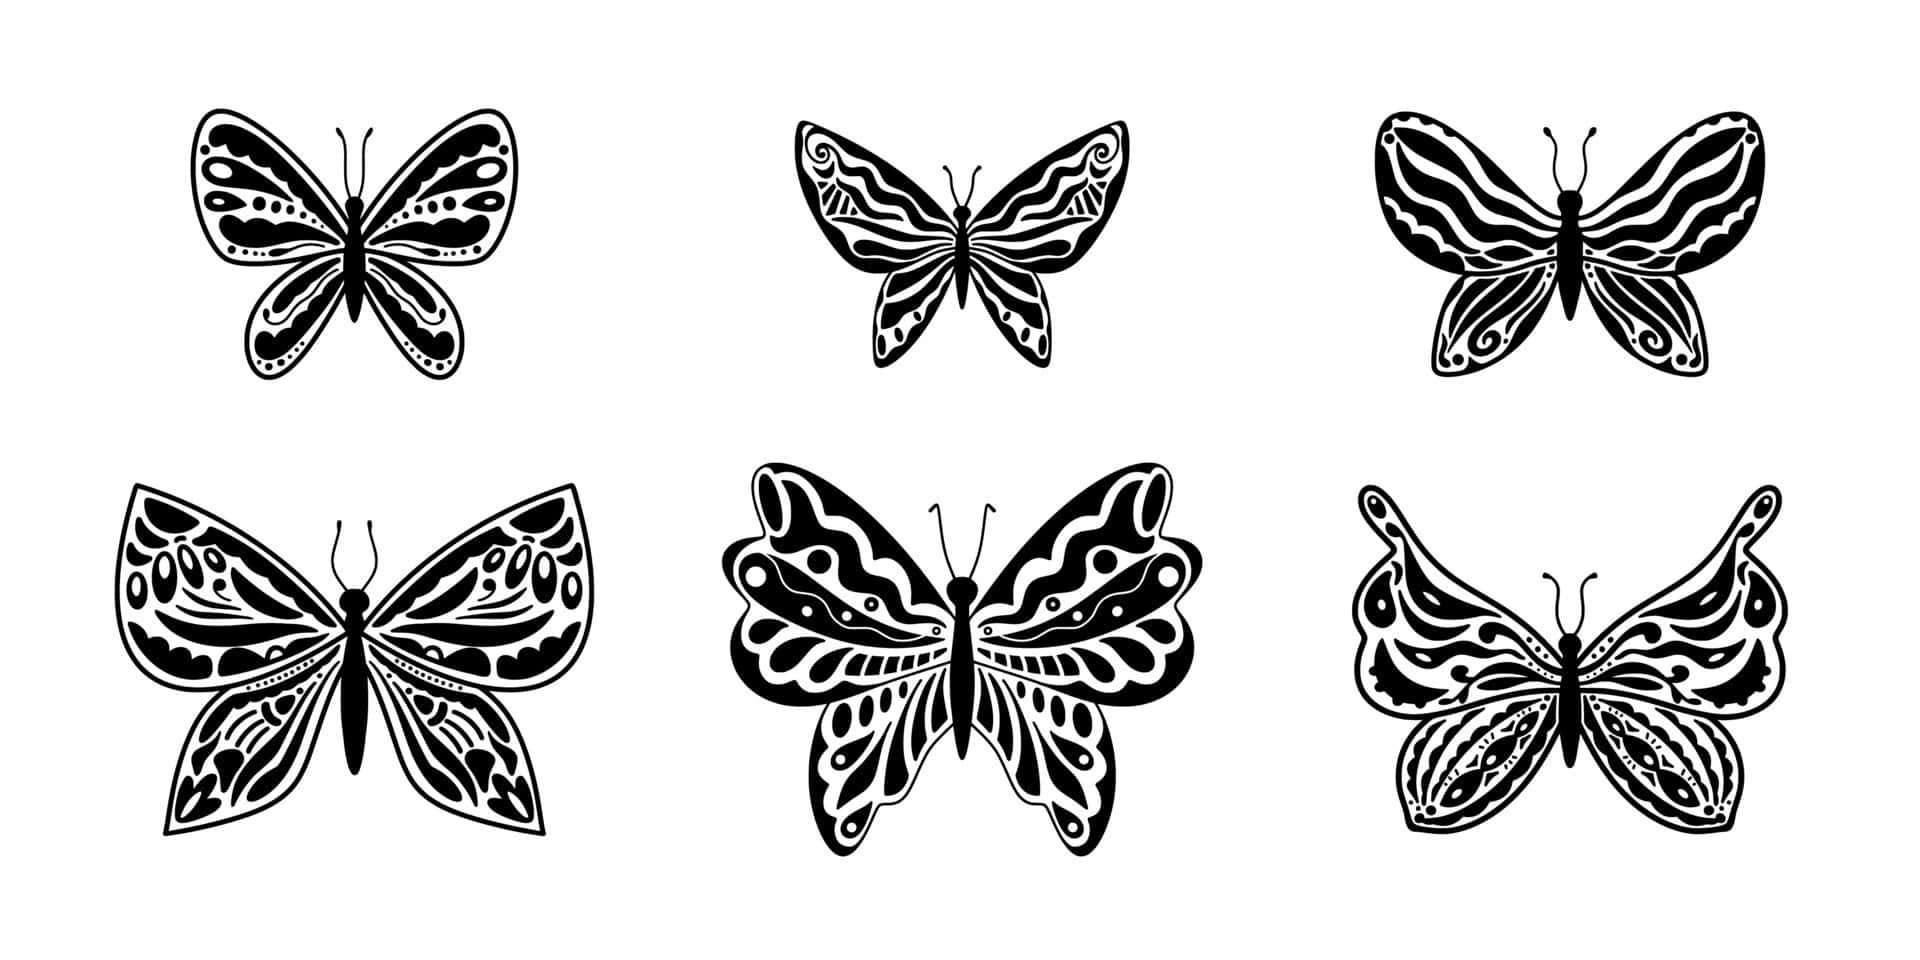 Monochrome Butterfly Collection Wallpaper